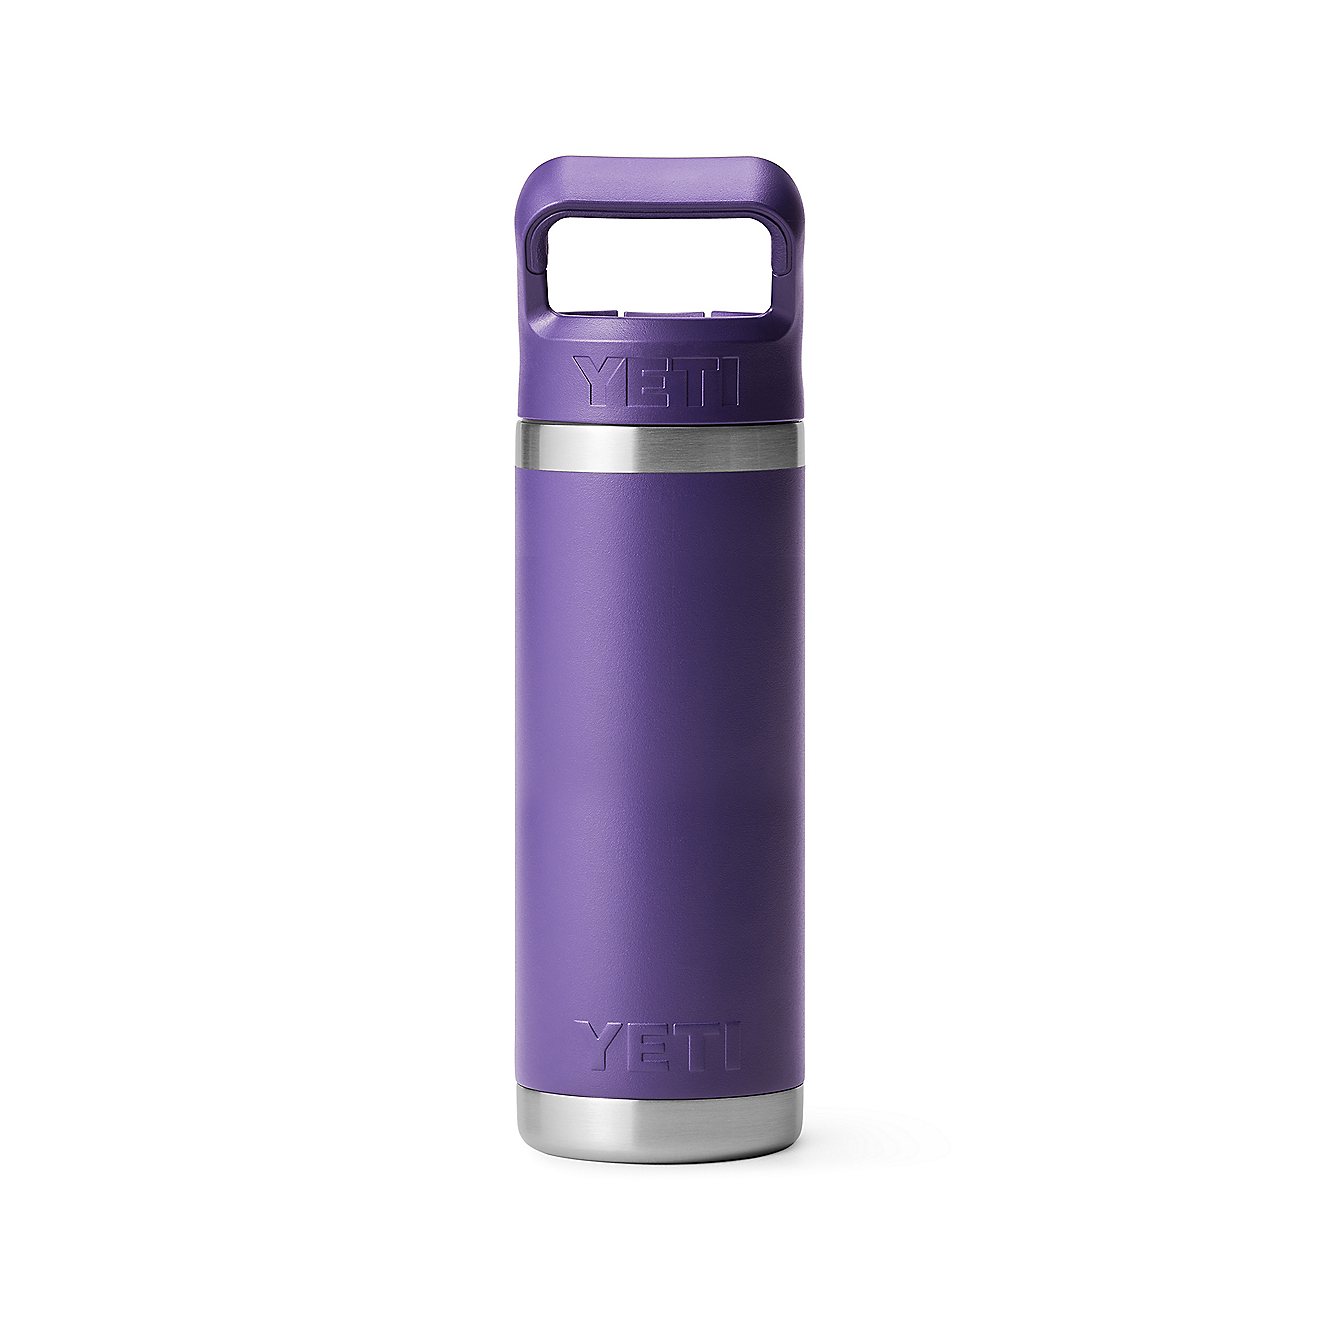 https://academy.scene7.com/is/image/academy//drinkware/yeti-rambler-18oz-straw-bottle-21071502032-purple/ca9f90df71d146e0b9a370598bb8f87f?$pdp-mobile-gallery-ng$